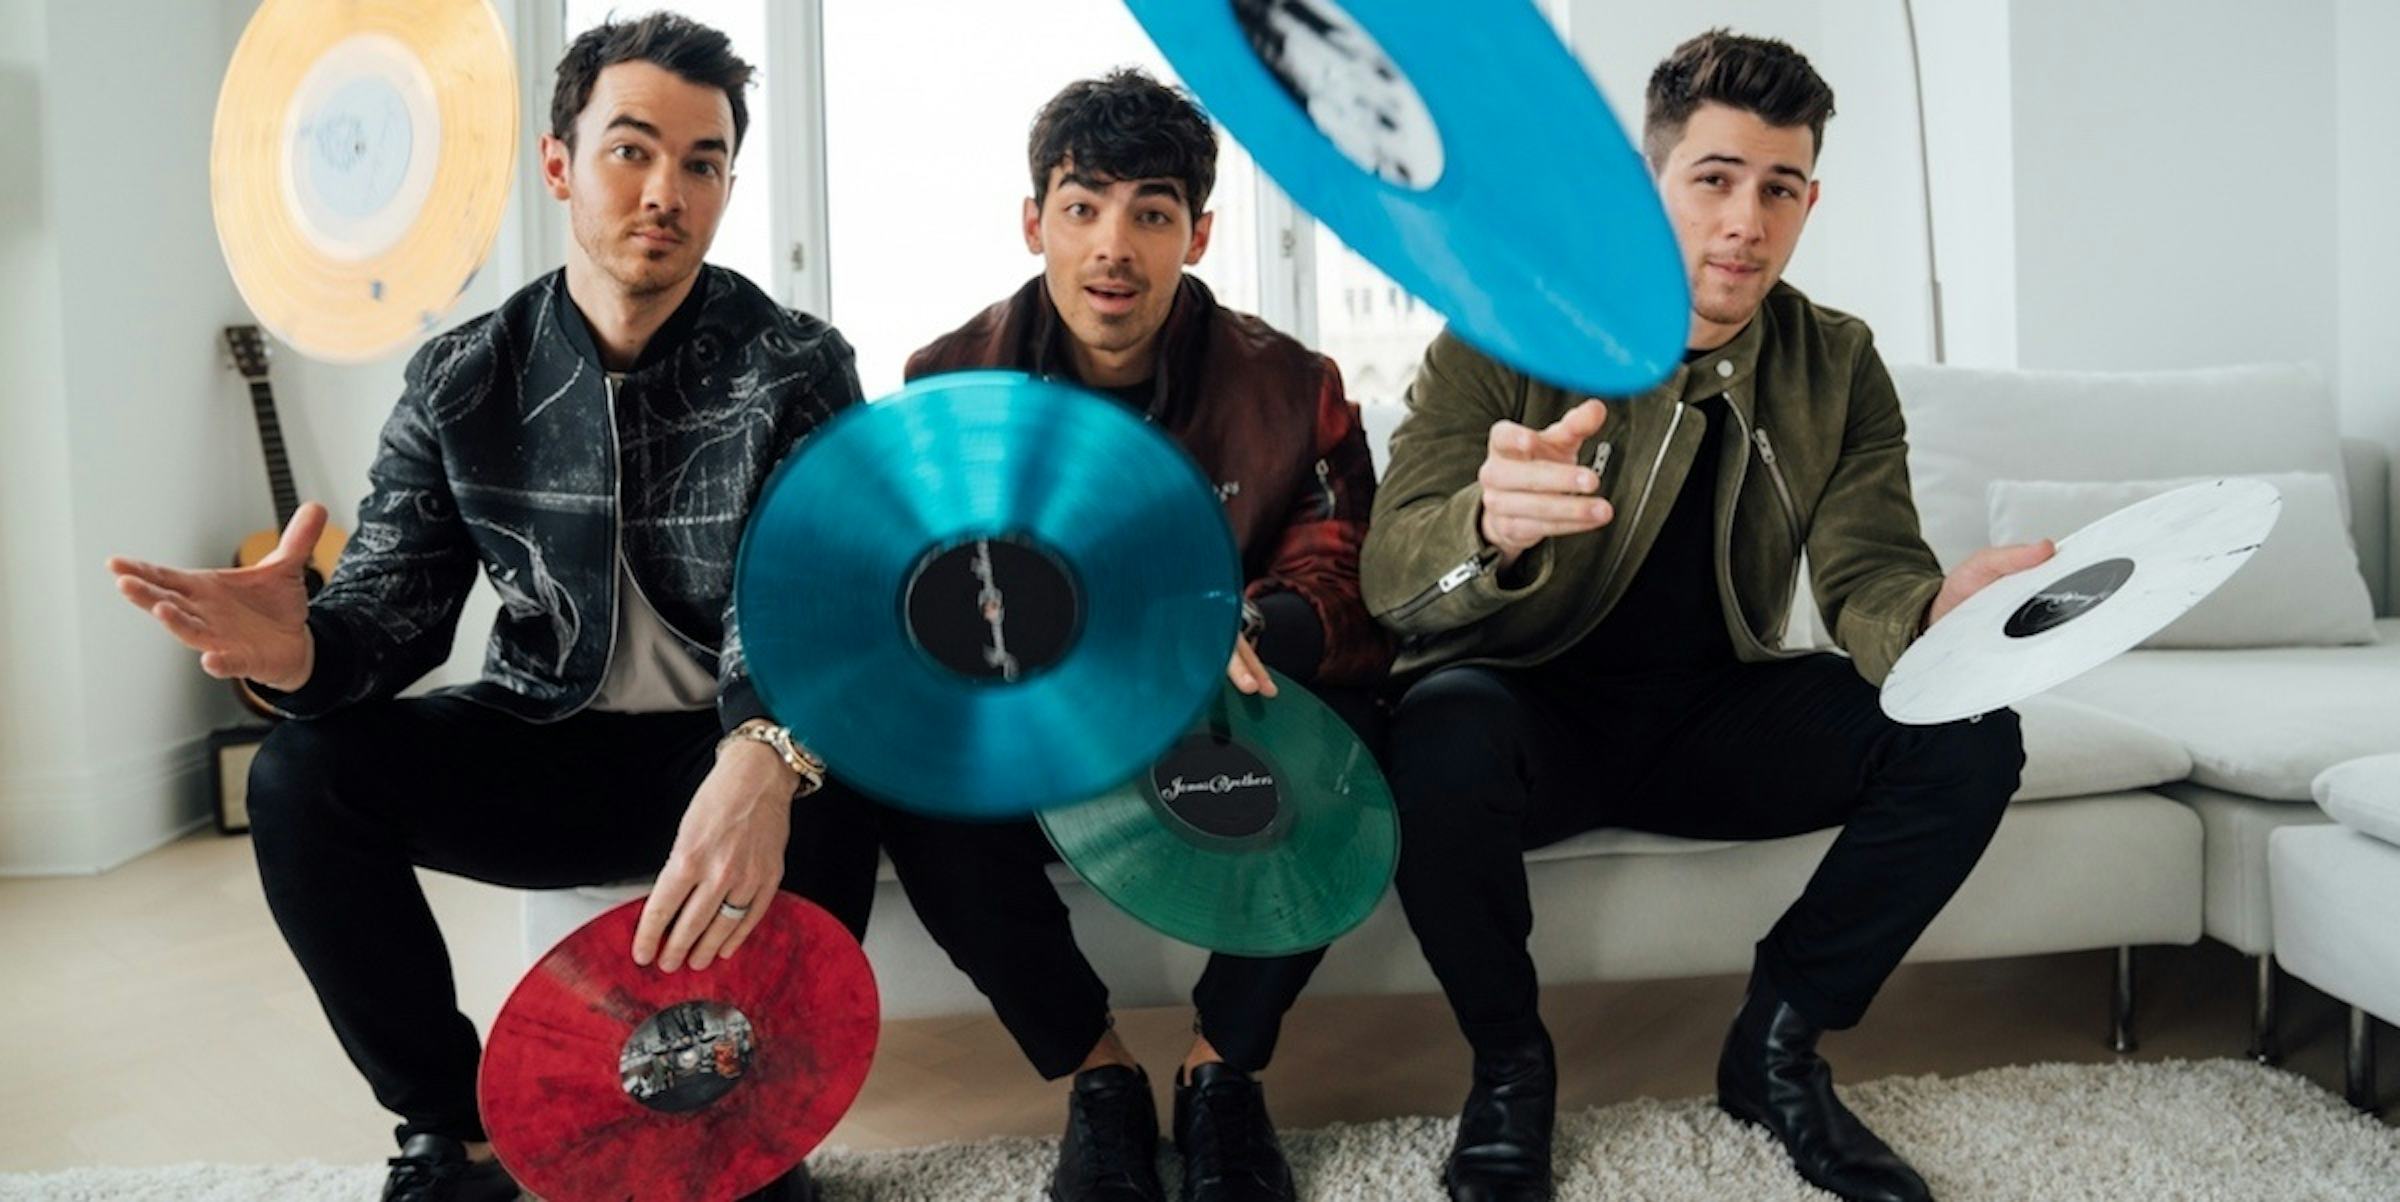 Jonas Brothers Albums Are Coming To Vinyl For The First Time